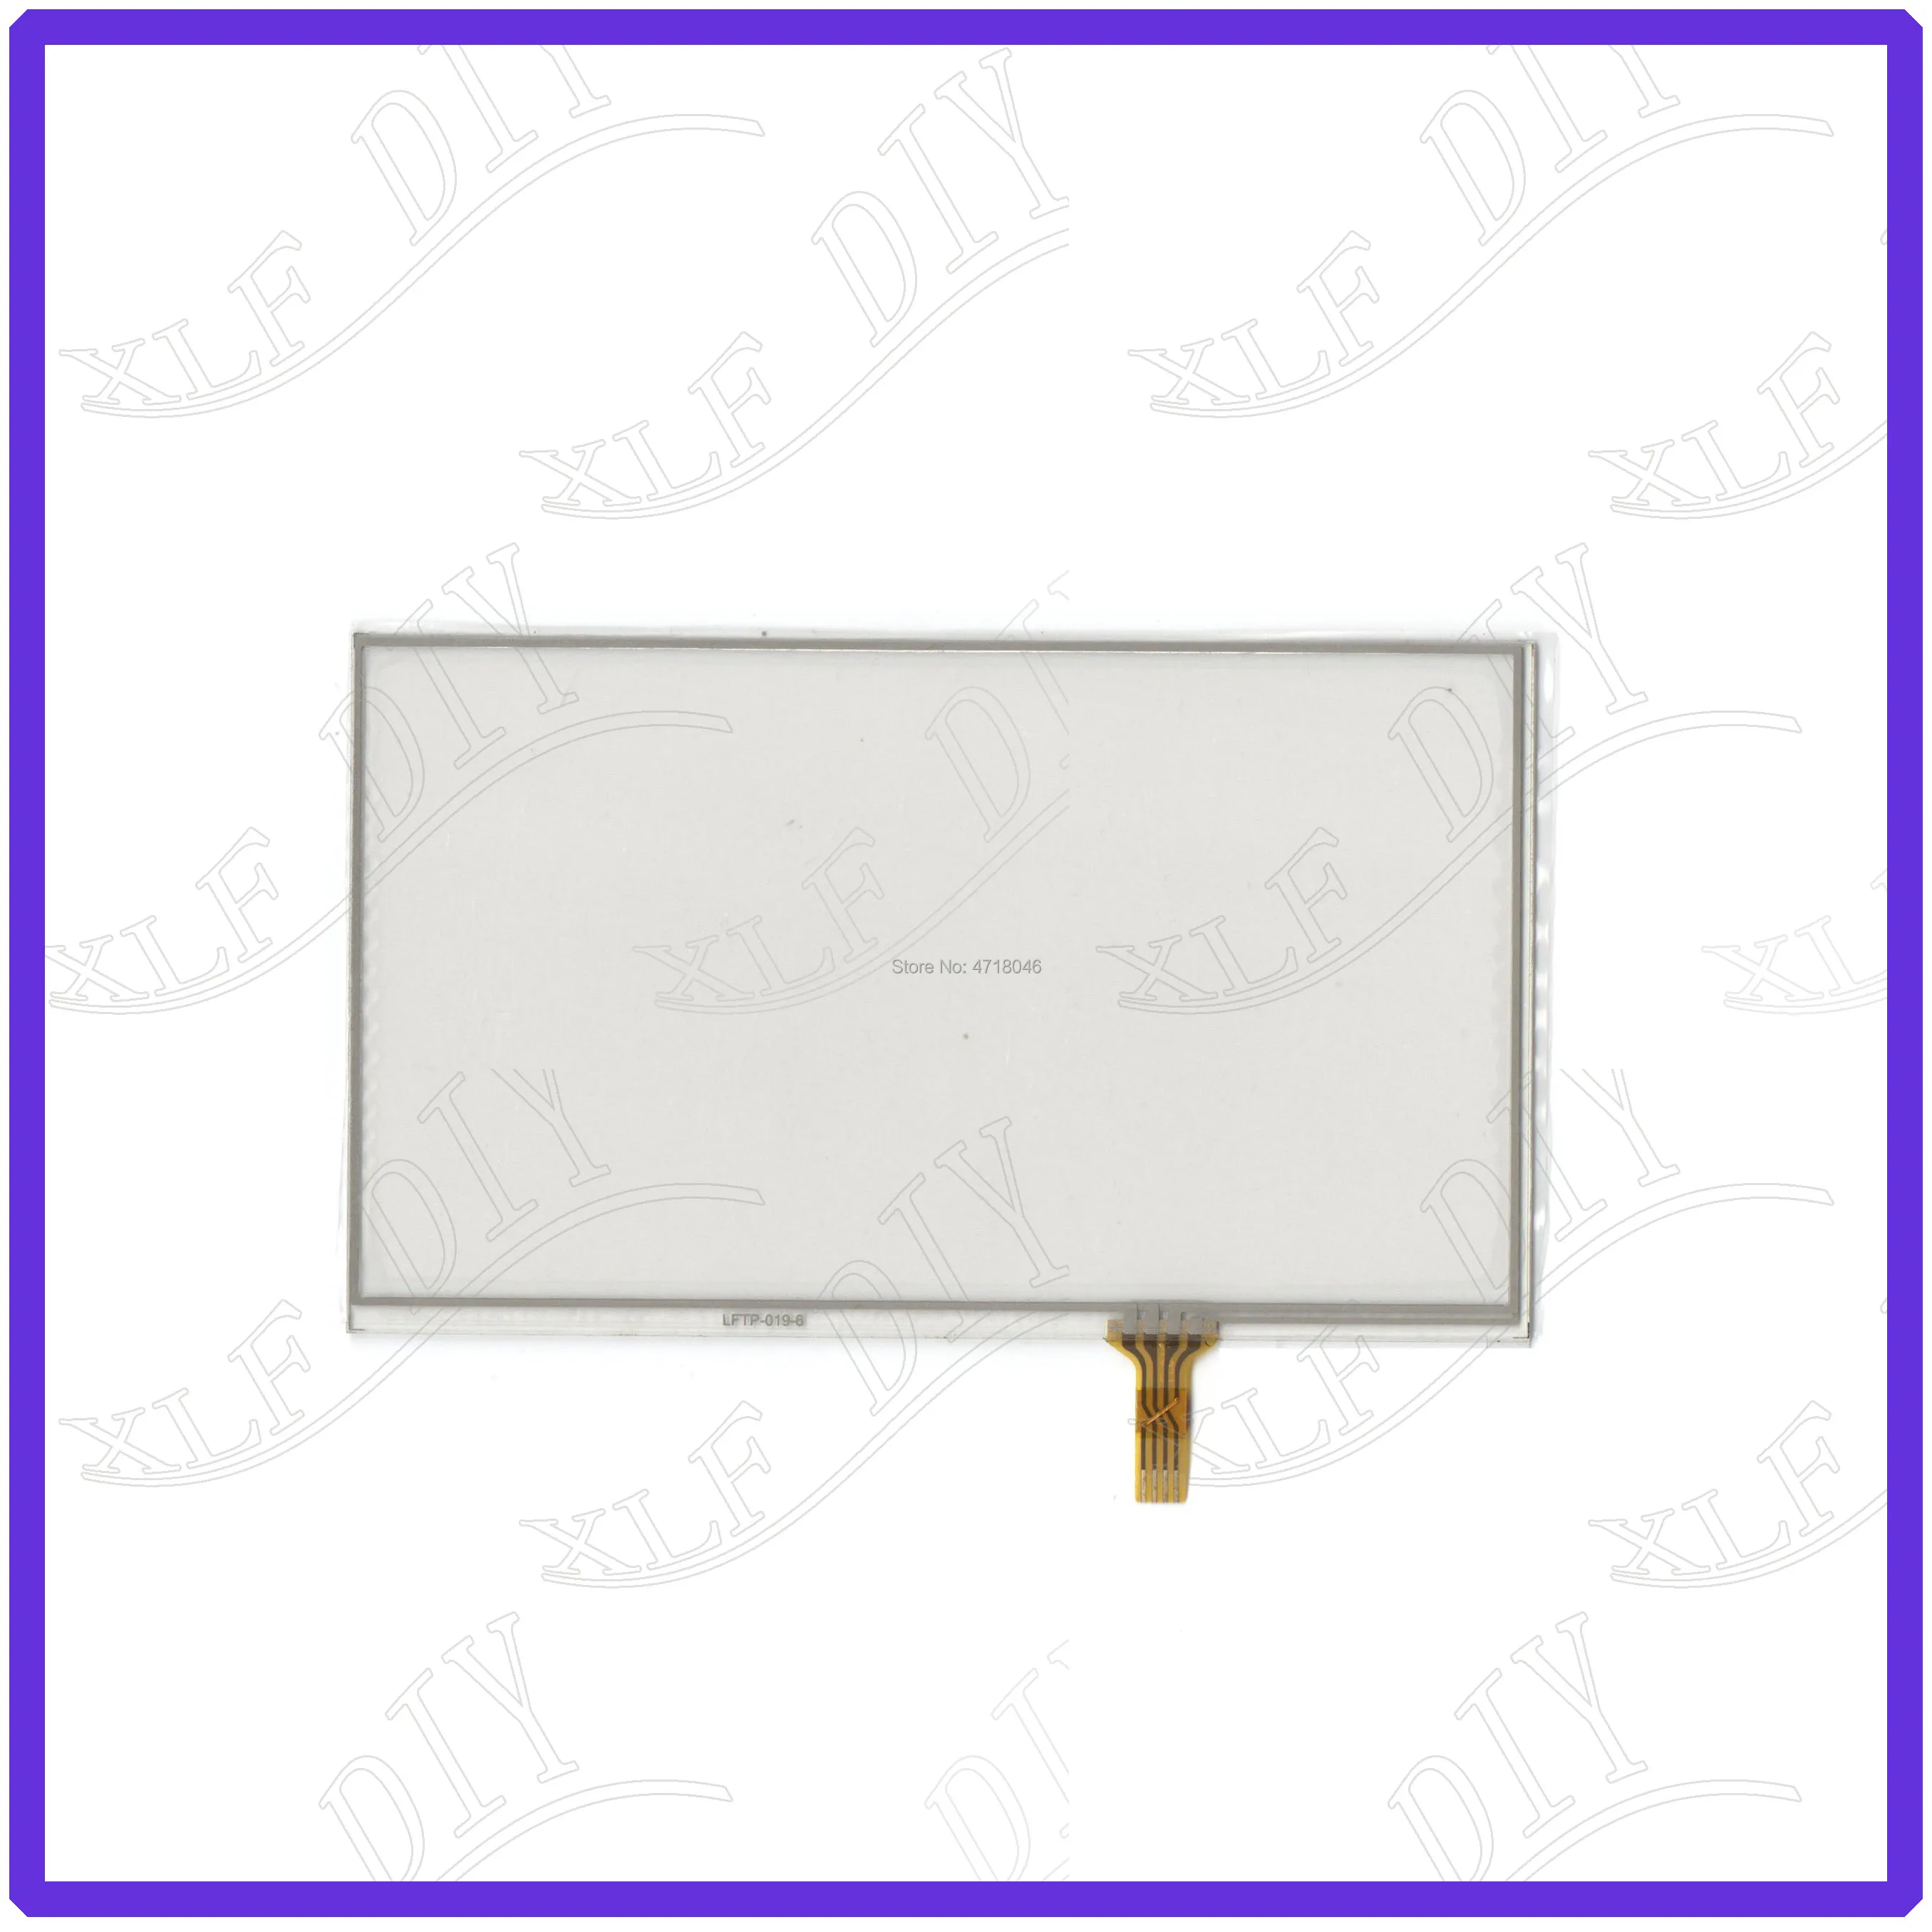 

ZYS for Ritmix RGP-670 compatible touchglass 4lines resistance screen this is compatible Touchsensor